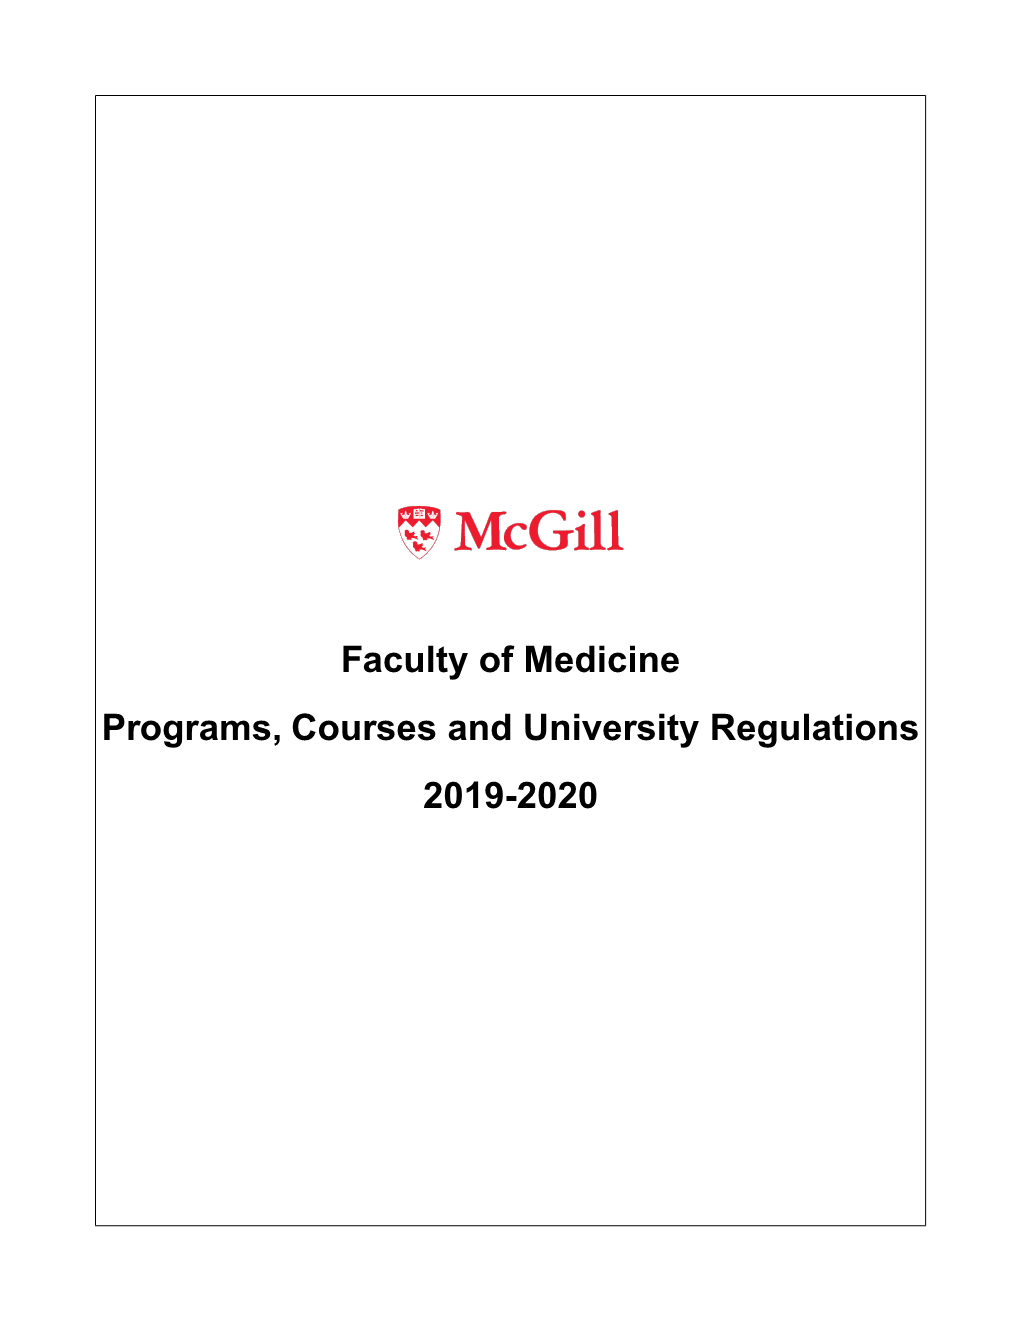 Faculty of Medicine Programs, Courses and University Regulations 2019-2020